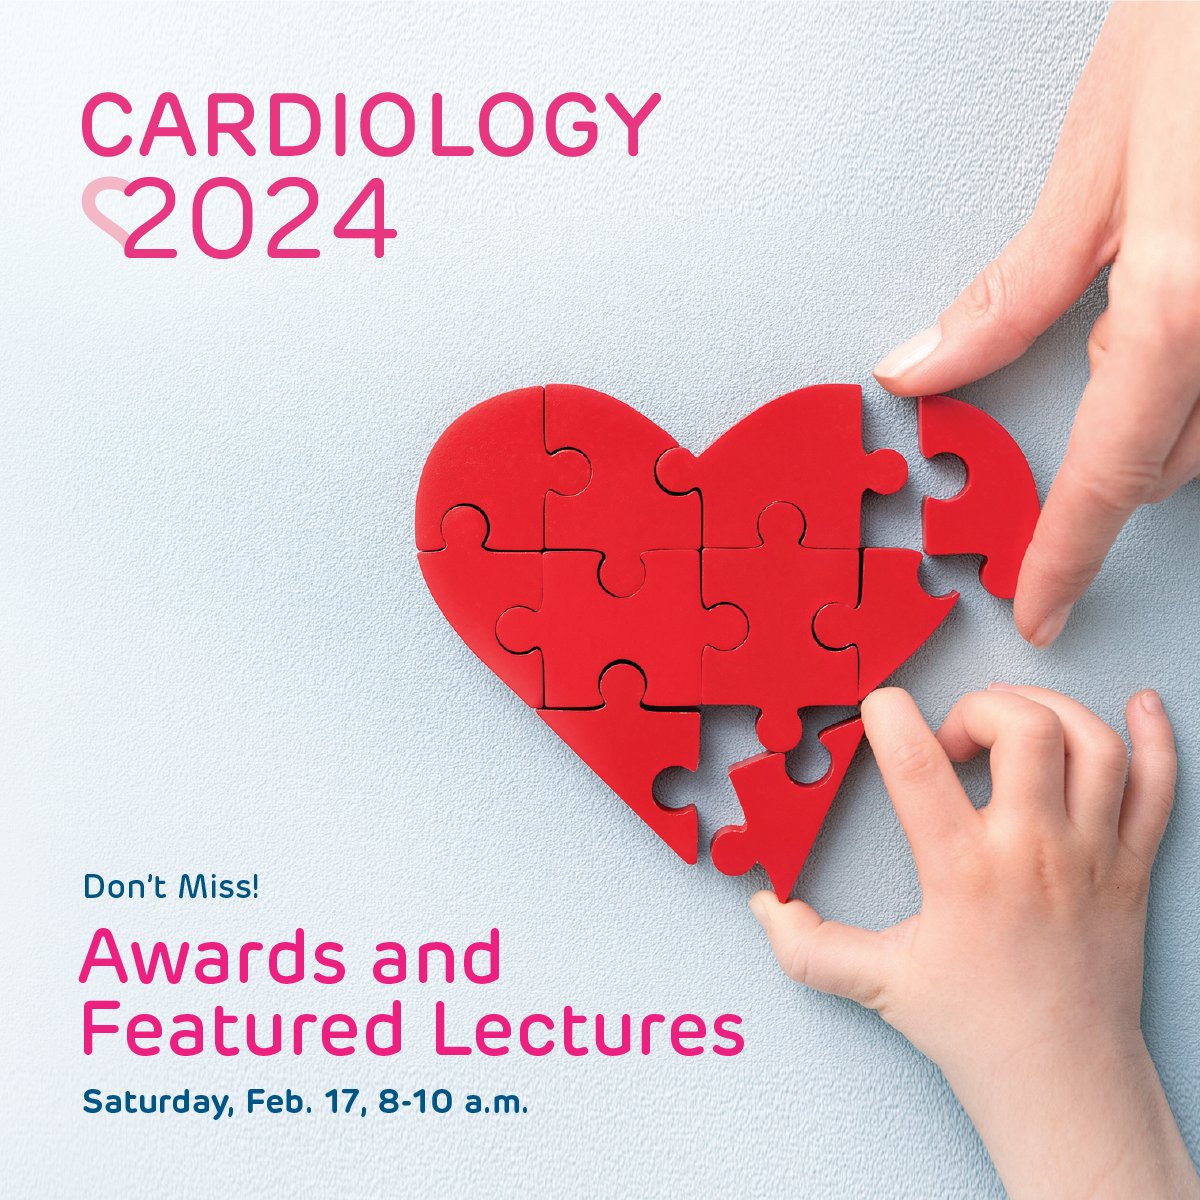 Good morning #Cardiology2024 attendees! We are looking forward to an incredible Featured Awards and Lectures session at 8am - don't miss it!